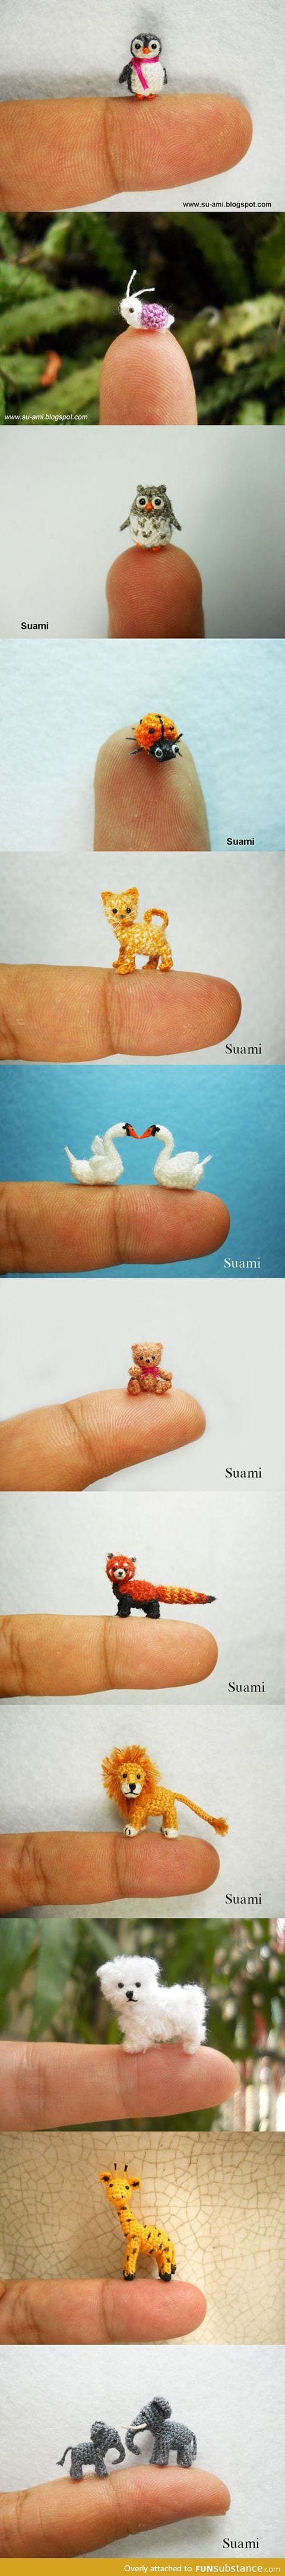 The tiniest animals by Suami